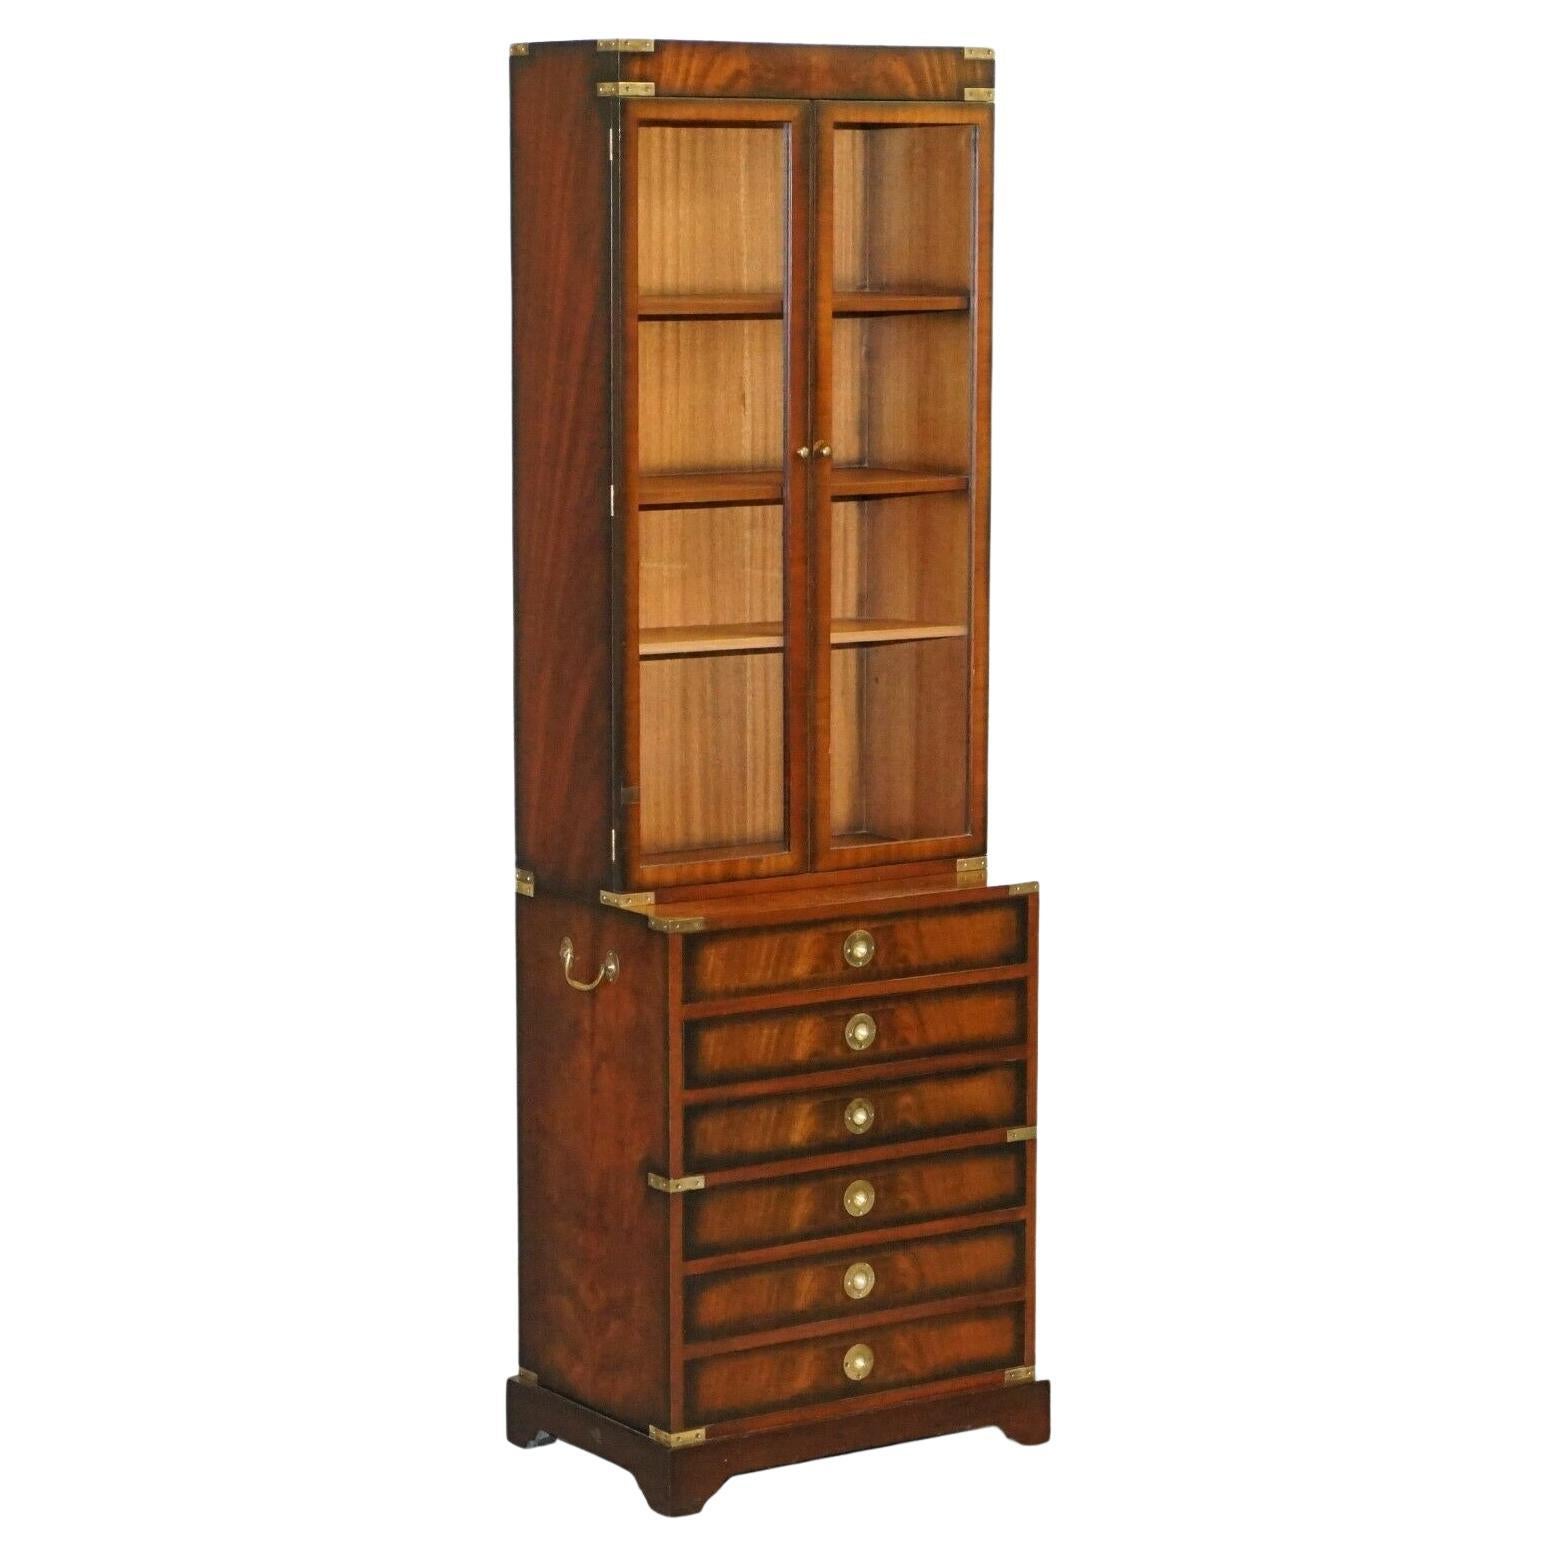 Harrods Kennedy Military Campaign Hardwood Bookcases + Chest of Drawers